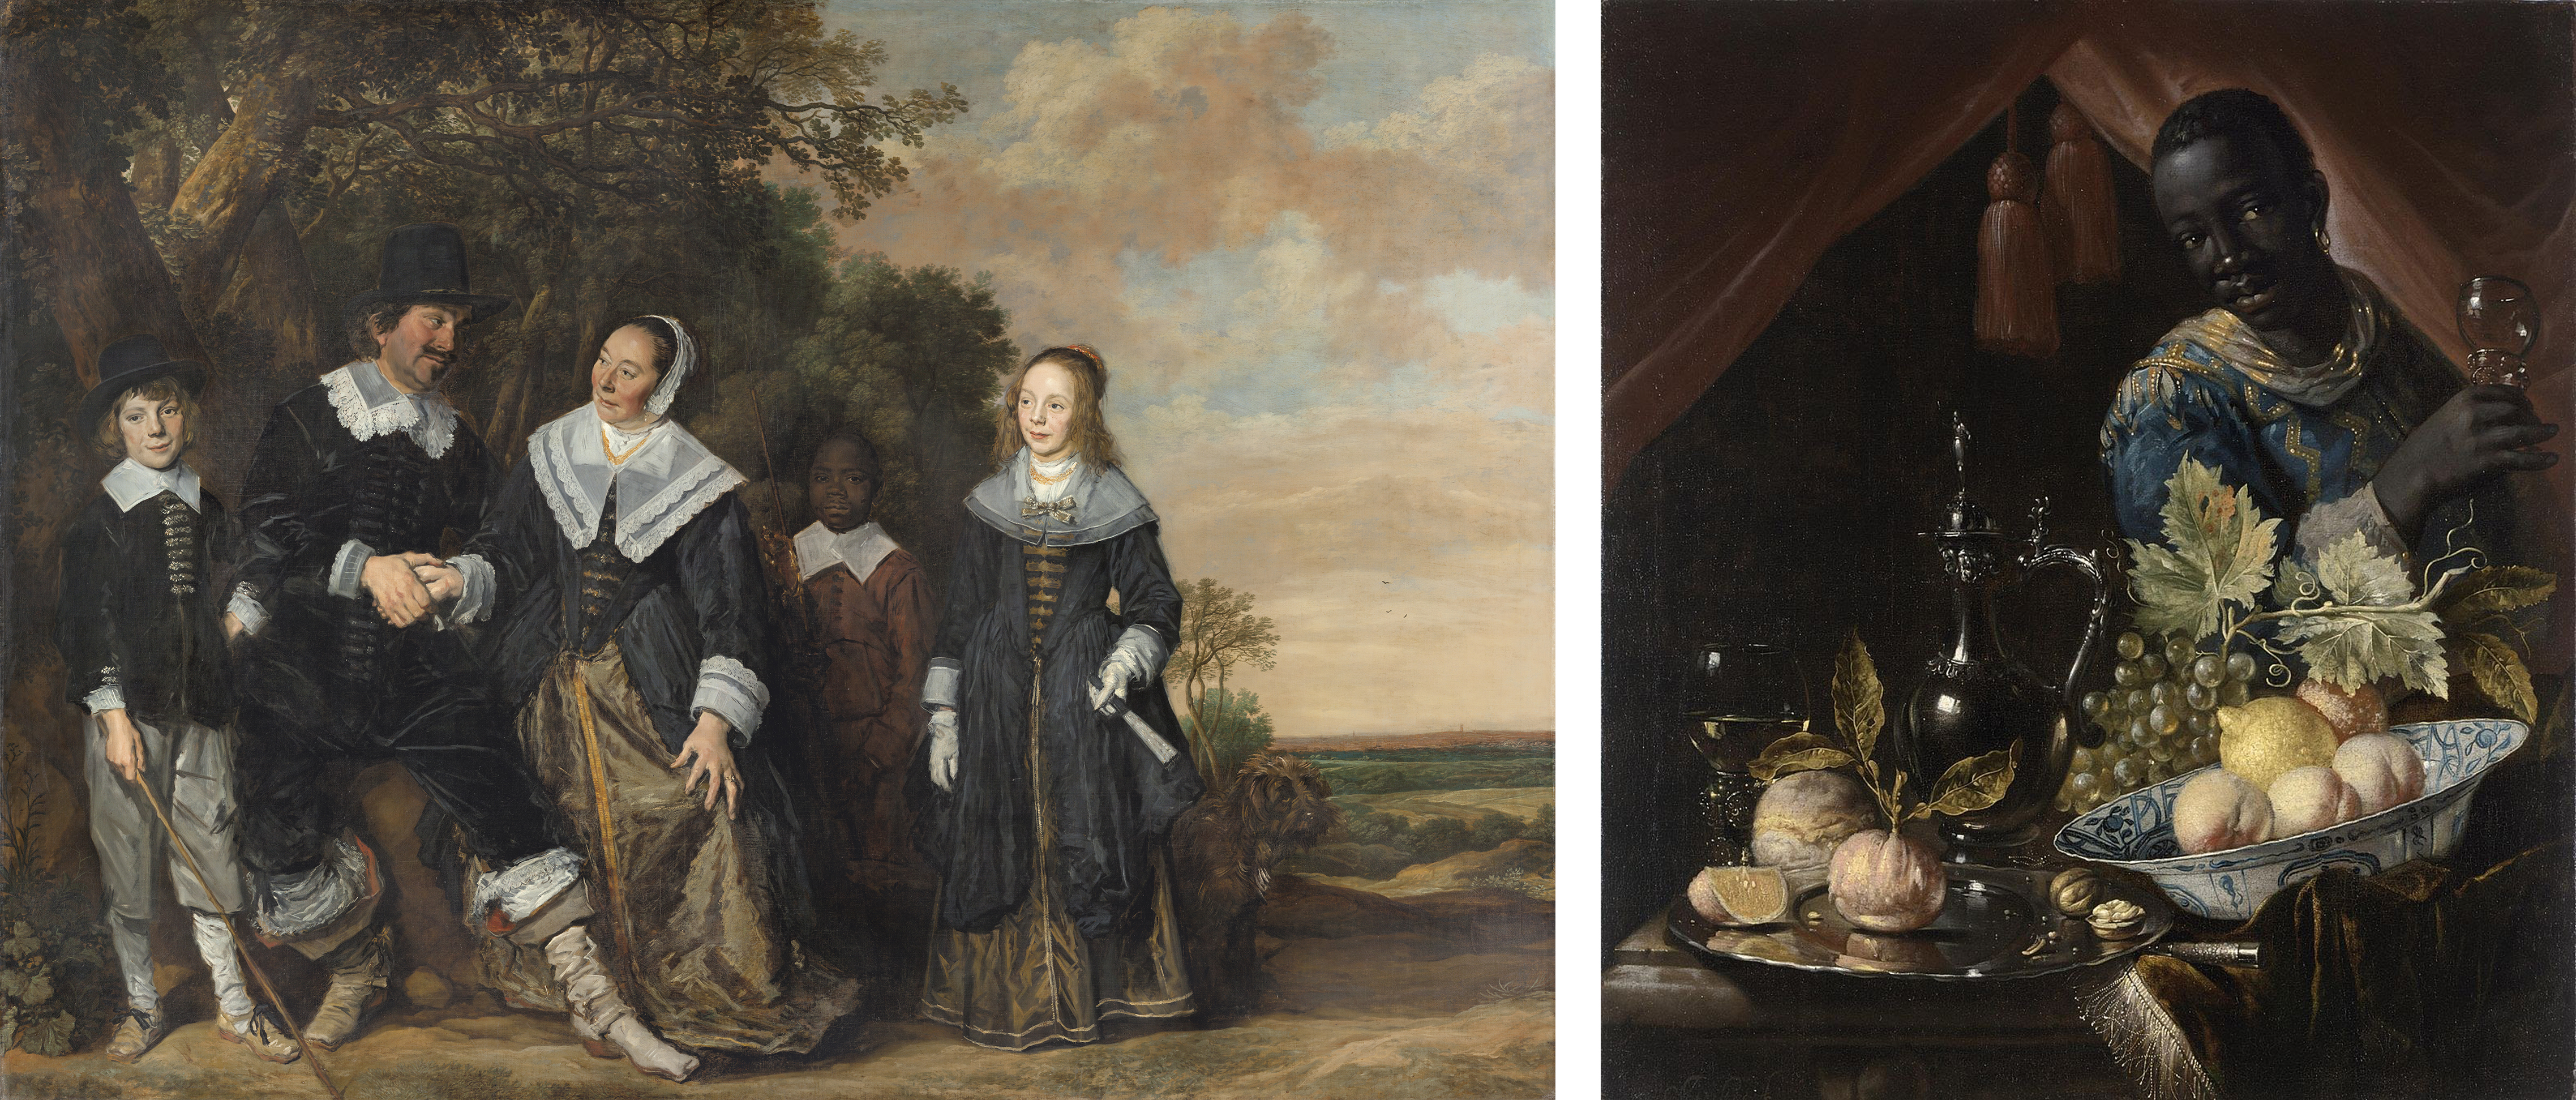 Left: (fig. 2) Frans Hals, Family Group in a Landscape, 1645–48, Museo Nacional Thyssen-Bornemisza, Madrid, photo © Fundación Colección Thyssen-Bornemisza, Madrid; Right: (fig. 3) Juriaen van Streek, Still Life with Male Figure, c. 1650–80, Collection of the Art Fund, Inc. at the Birmingham Museum of Art, purchased with funds provided by Margaret G. Livingston, photo via Wikimedia Commons